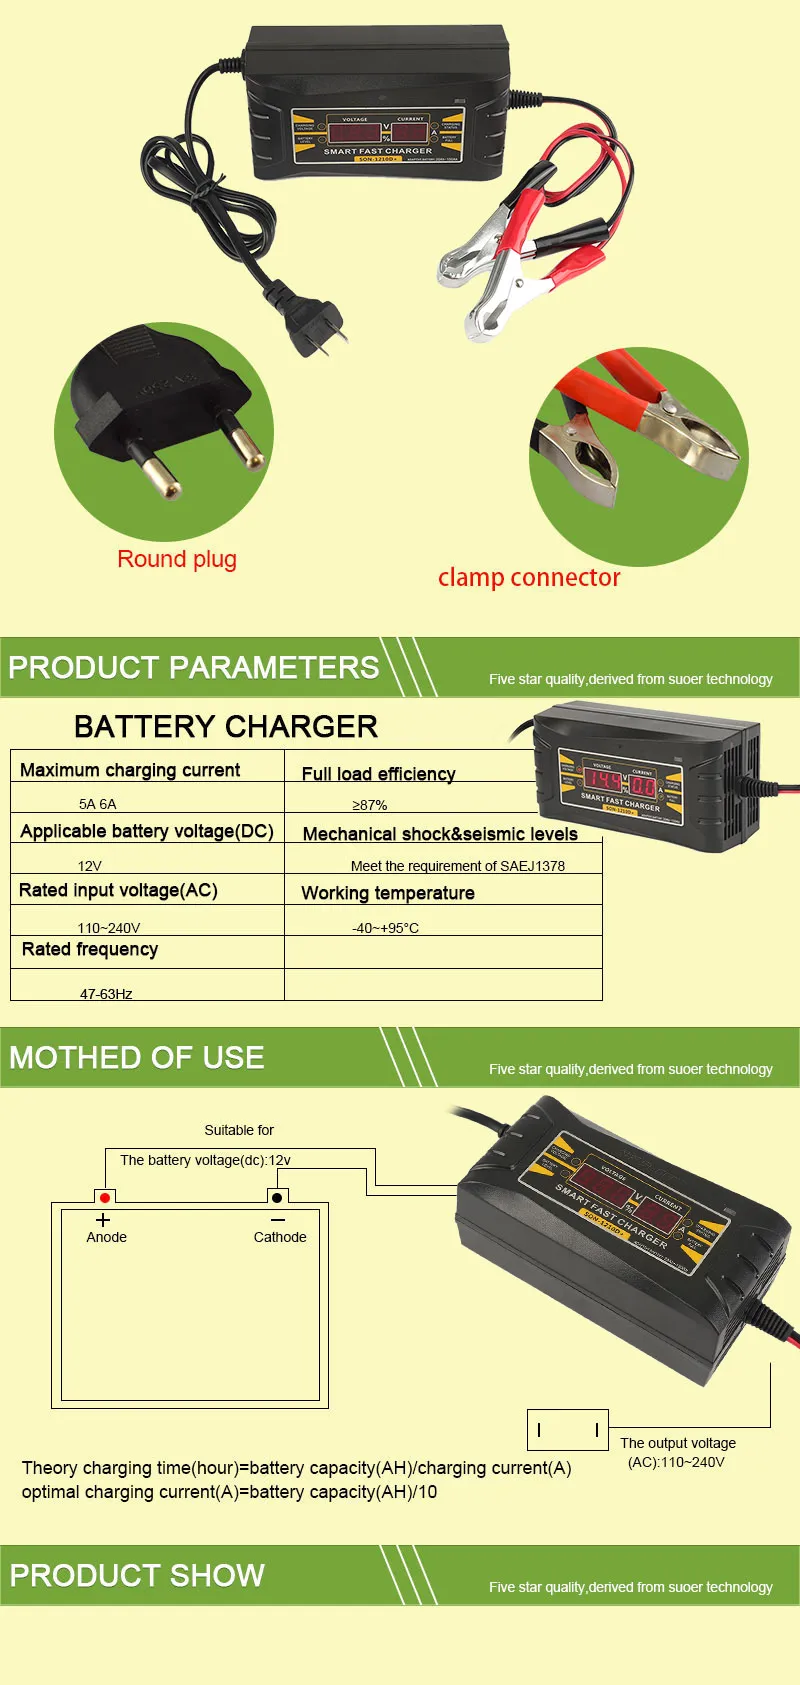 Full Automatic Car Battery  110V/220V To 12V 6A 10A Smart Fast Power Charging For Wet Dry Lead Acid Digital LCD Display